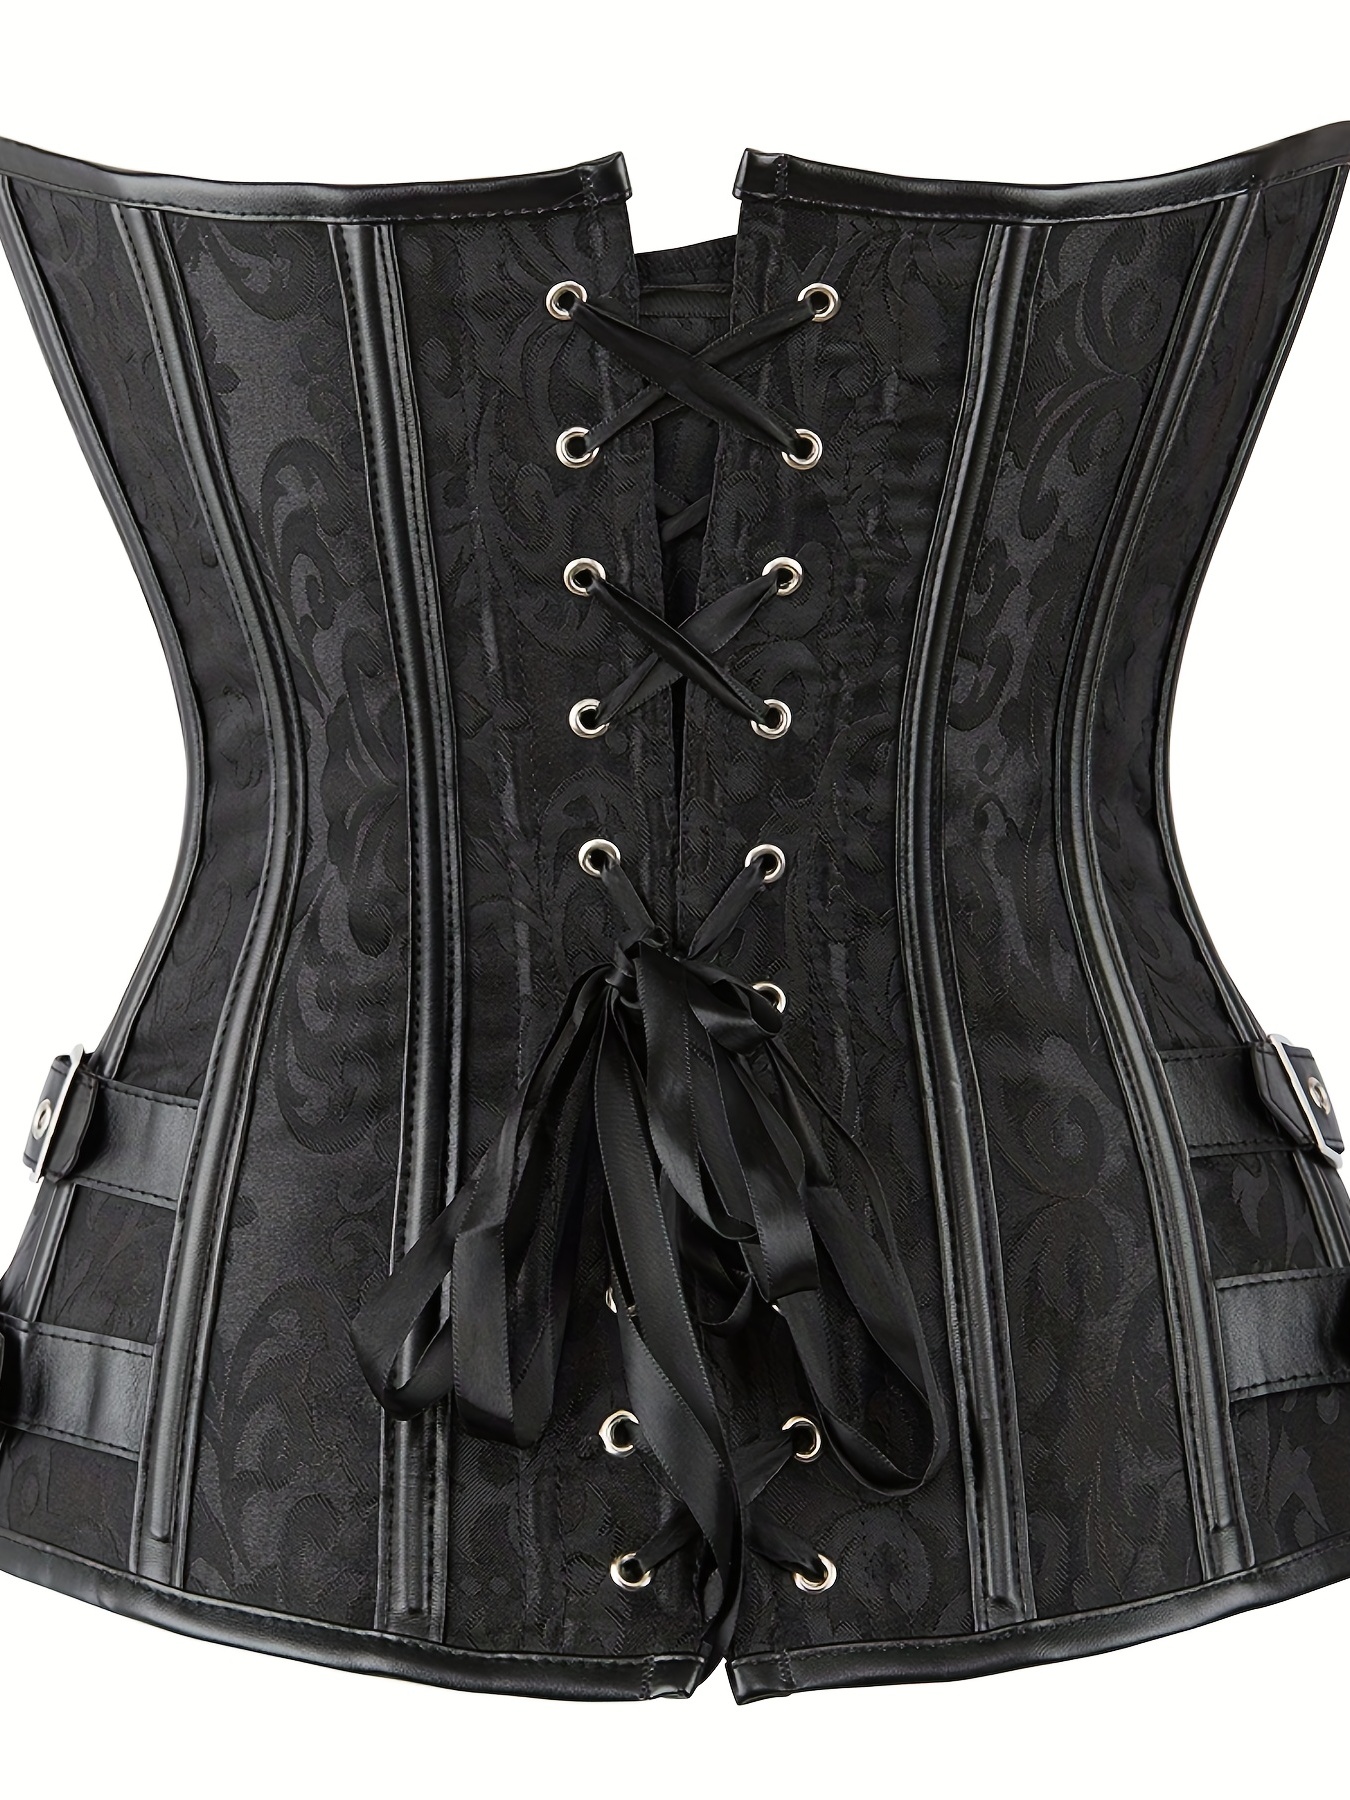 Floral Print Front Hook Corsets, Court Style Tummy Control Lace Up ...